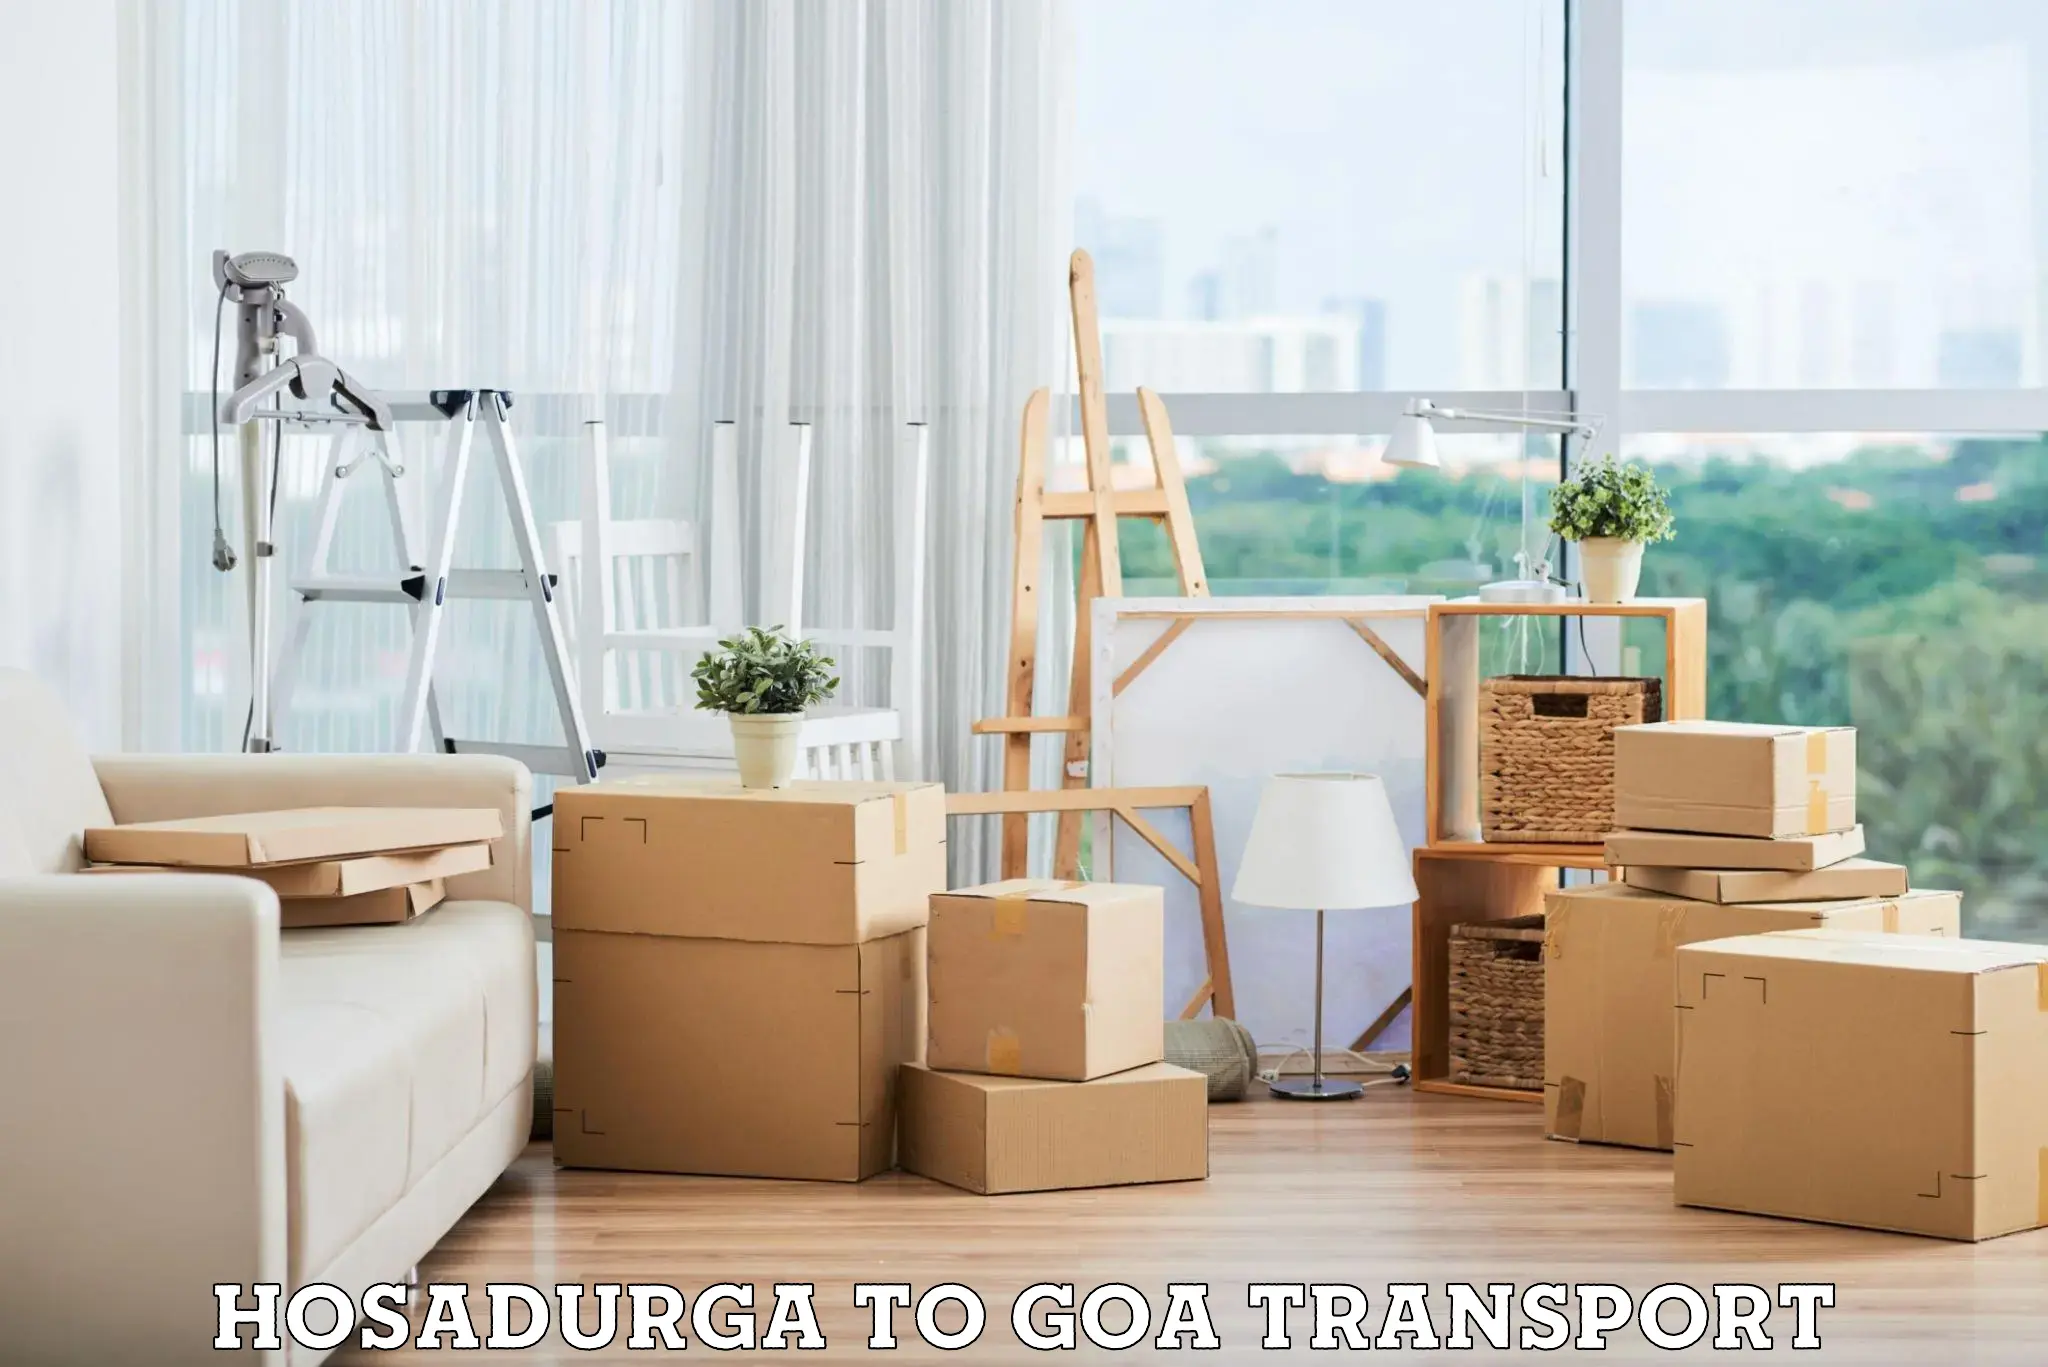 Transport bike from one state to another Hosadurga to Goa